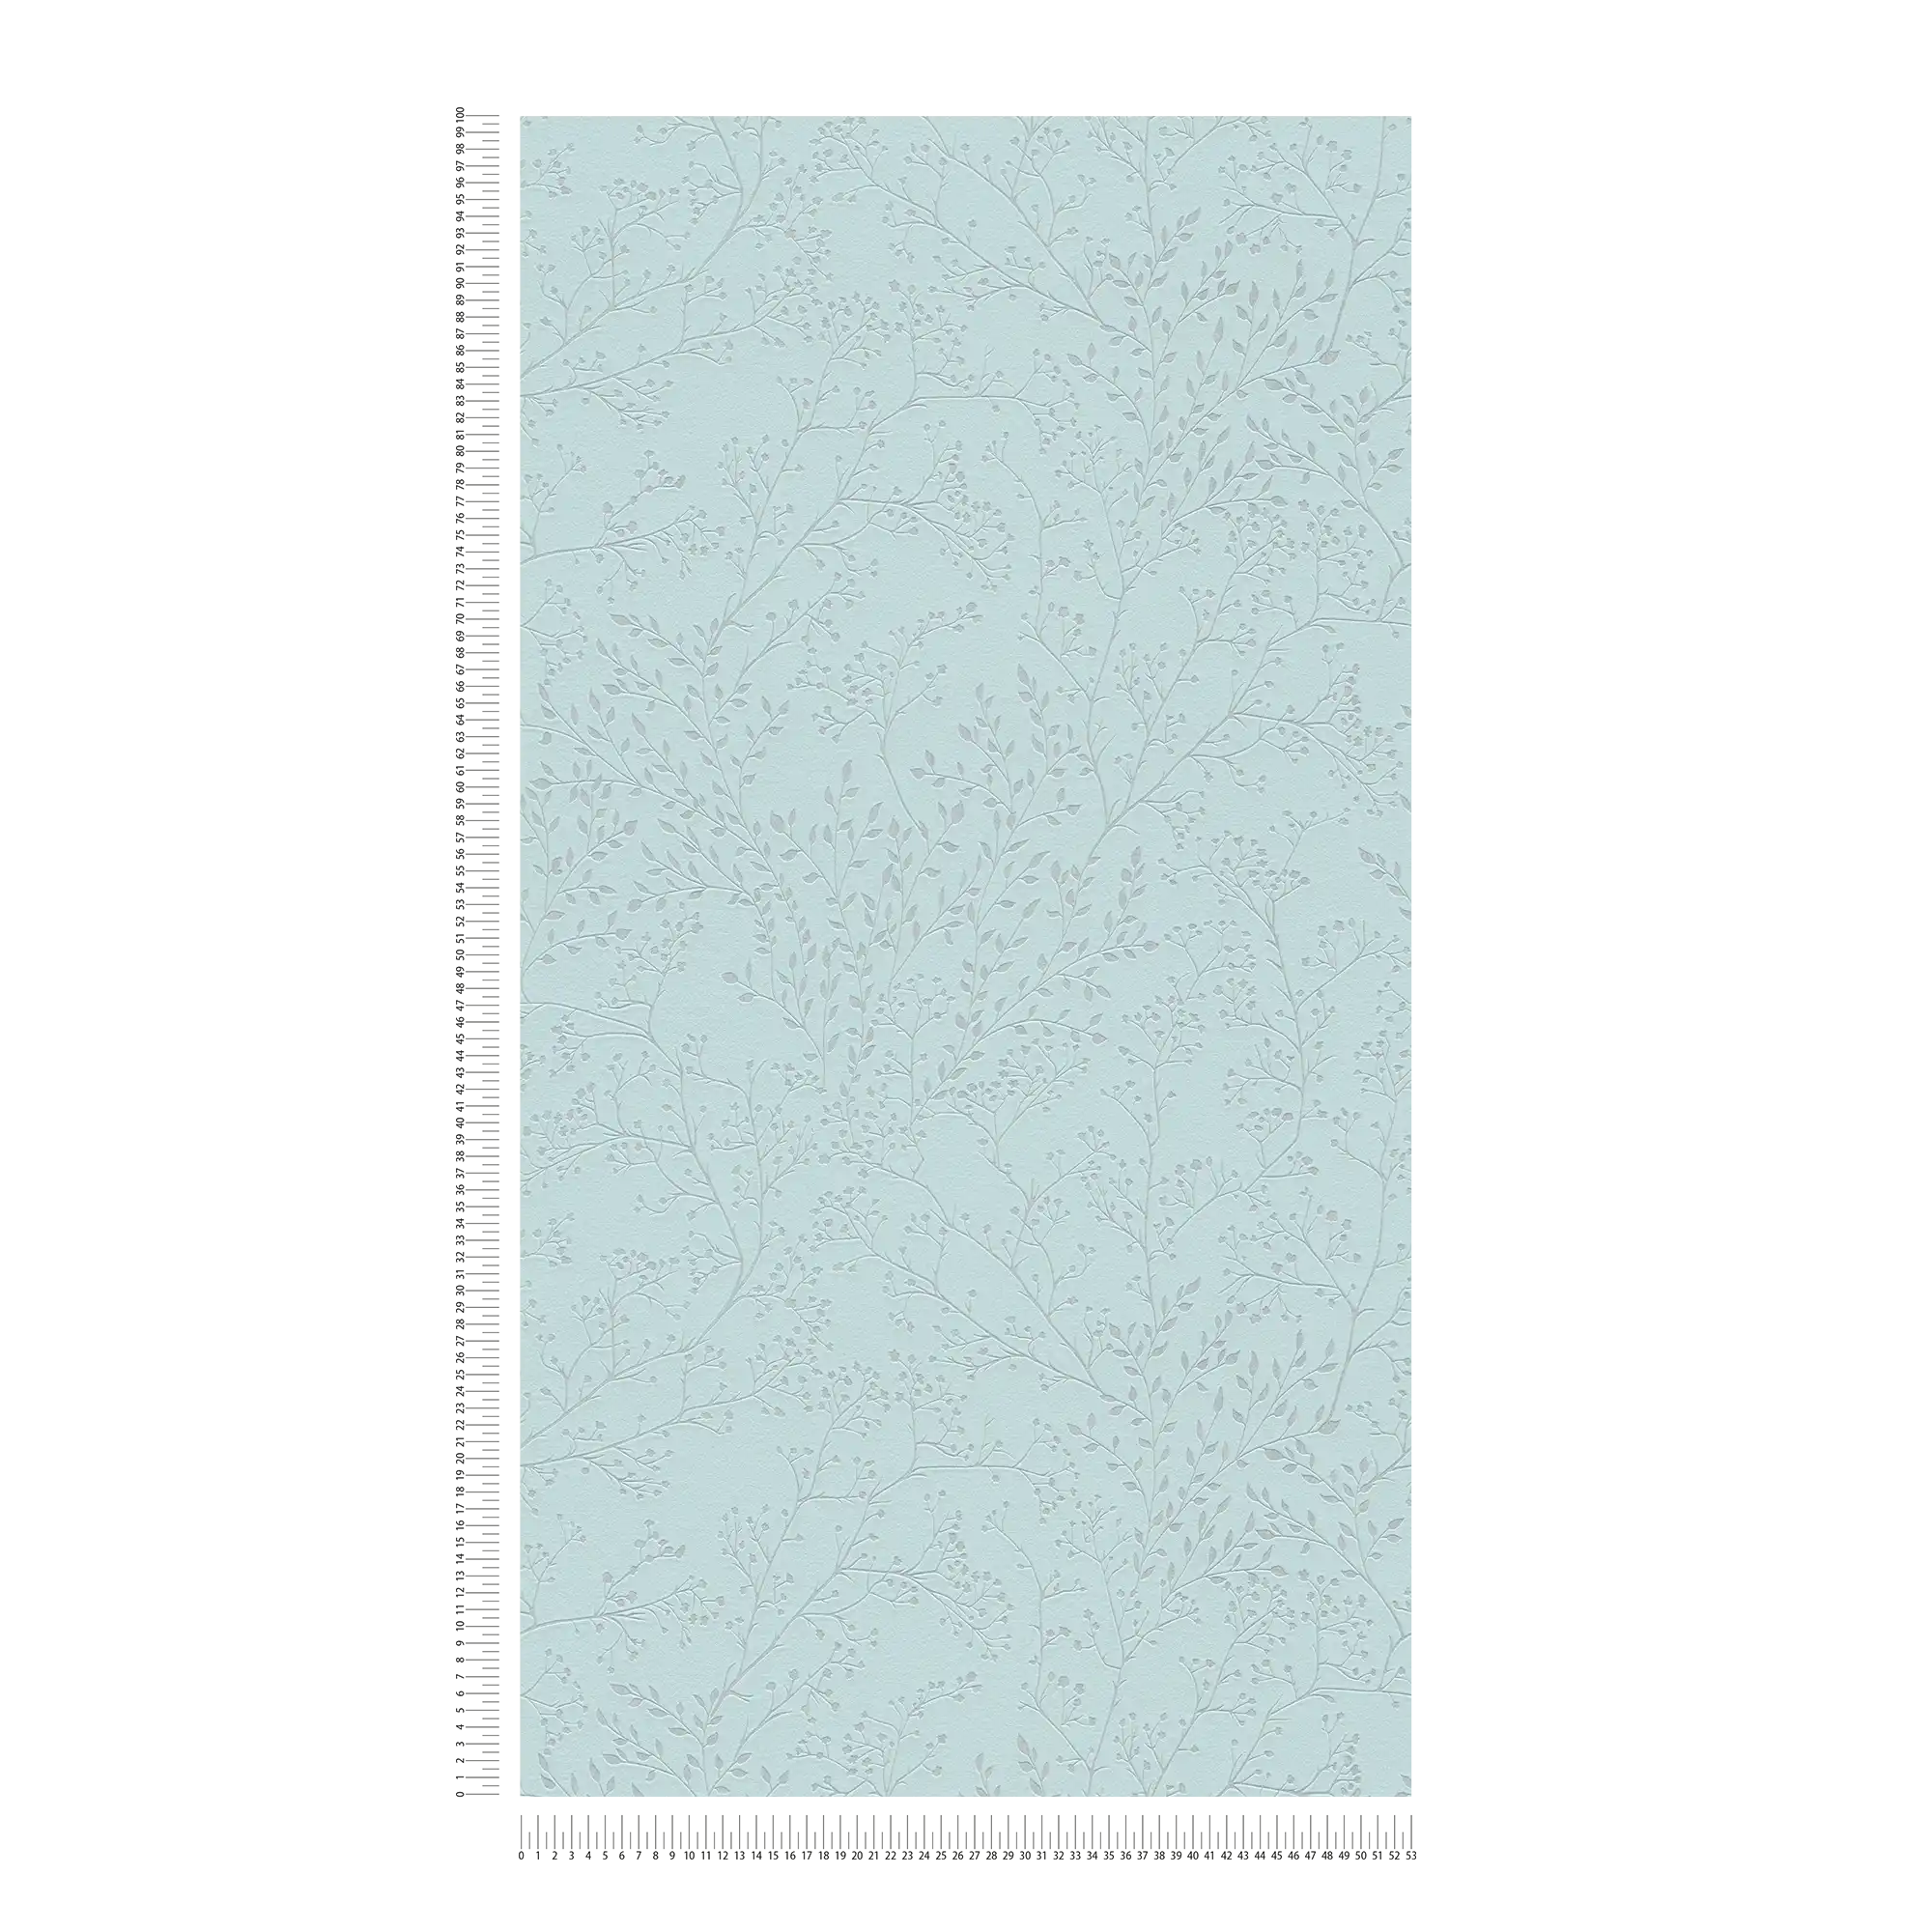             Plain wallpaper light blue with leaves pattern, gloss & texture effect
        